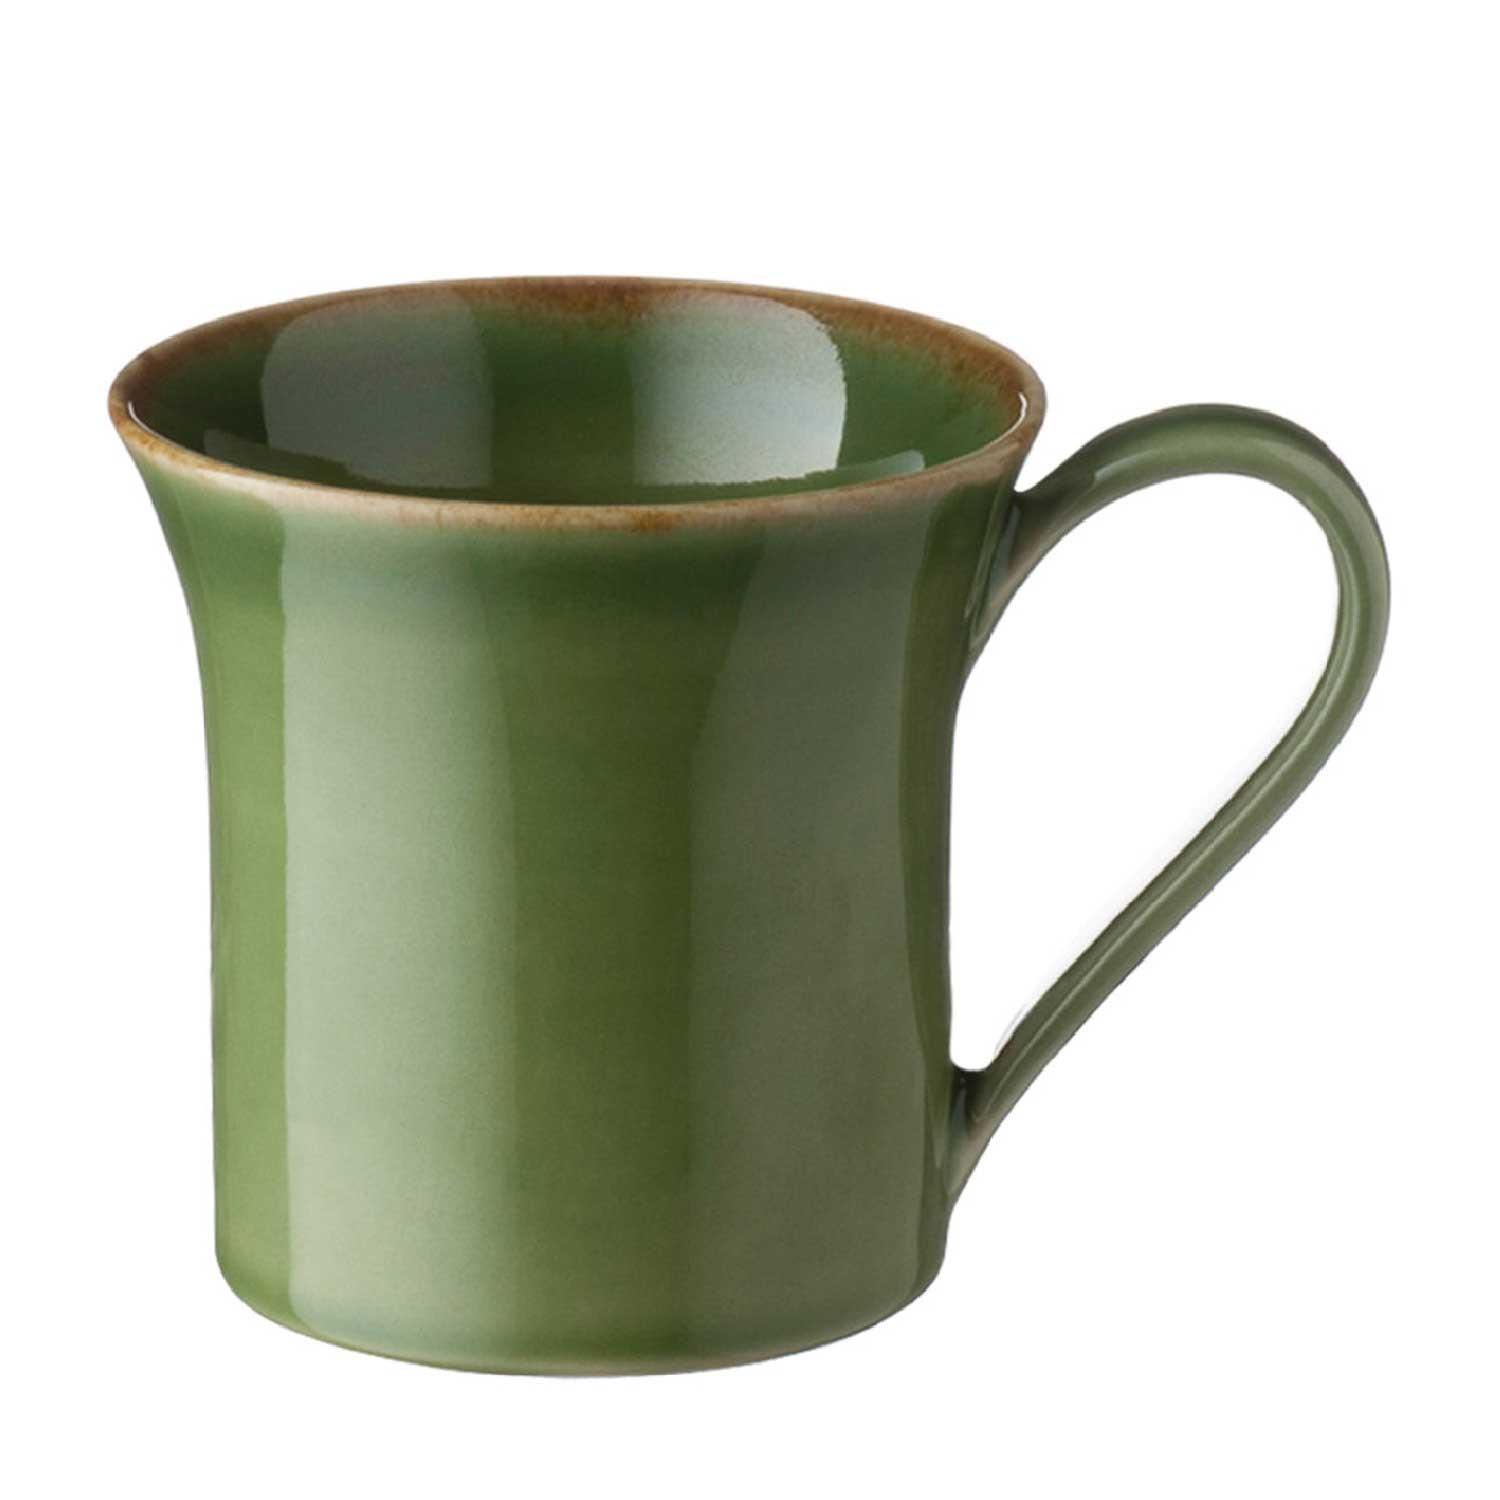 Pottery Tumbler Brown with Green Rim